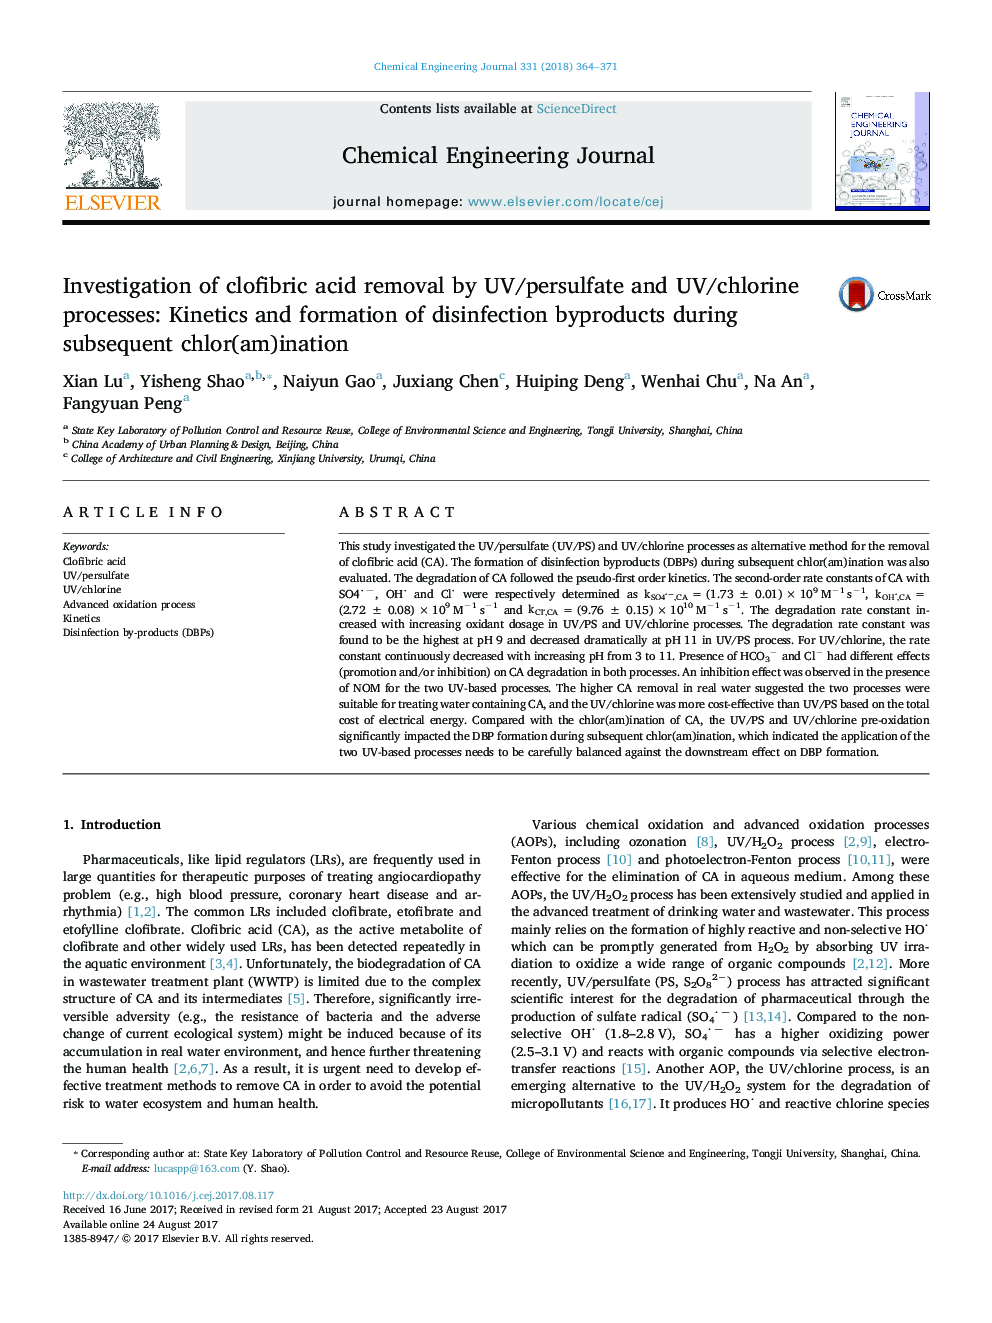 Investigation of clofibric acid removal by UV/persulfate and UV/chlorine processes: Kinetics and formation of disinfection byproducts during subsequent chlor(am)ination